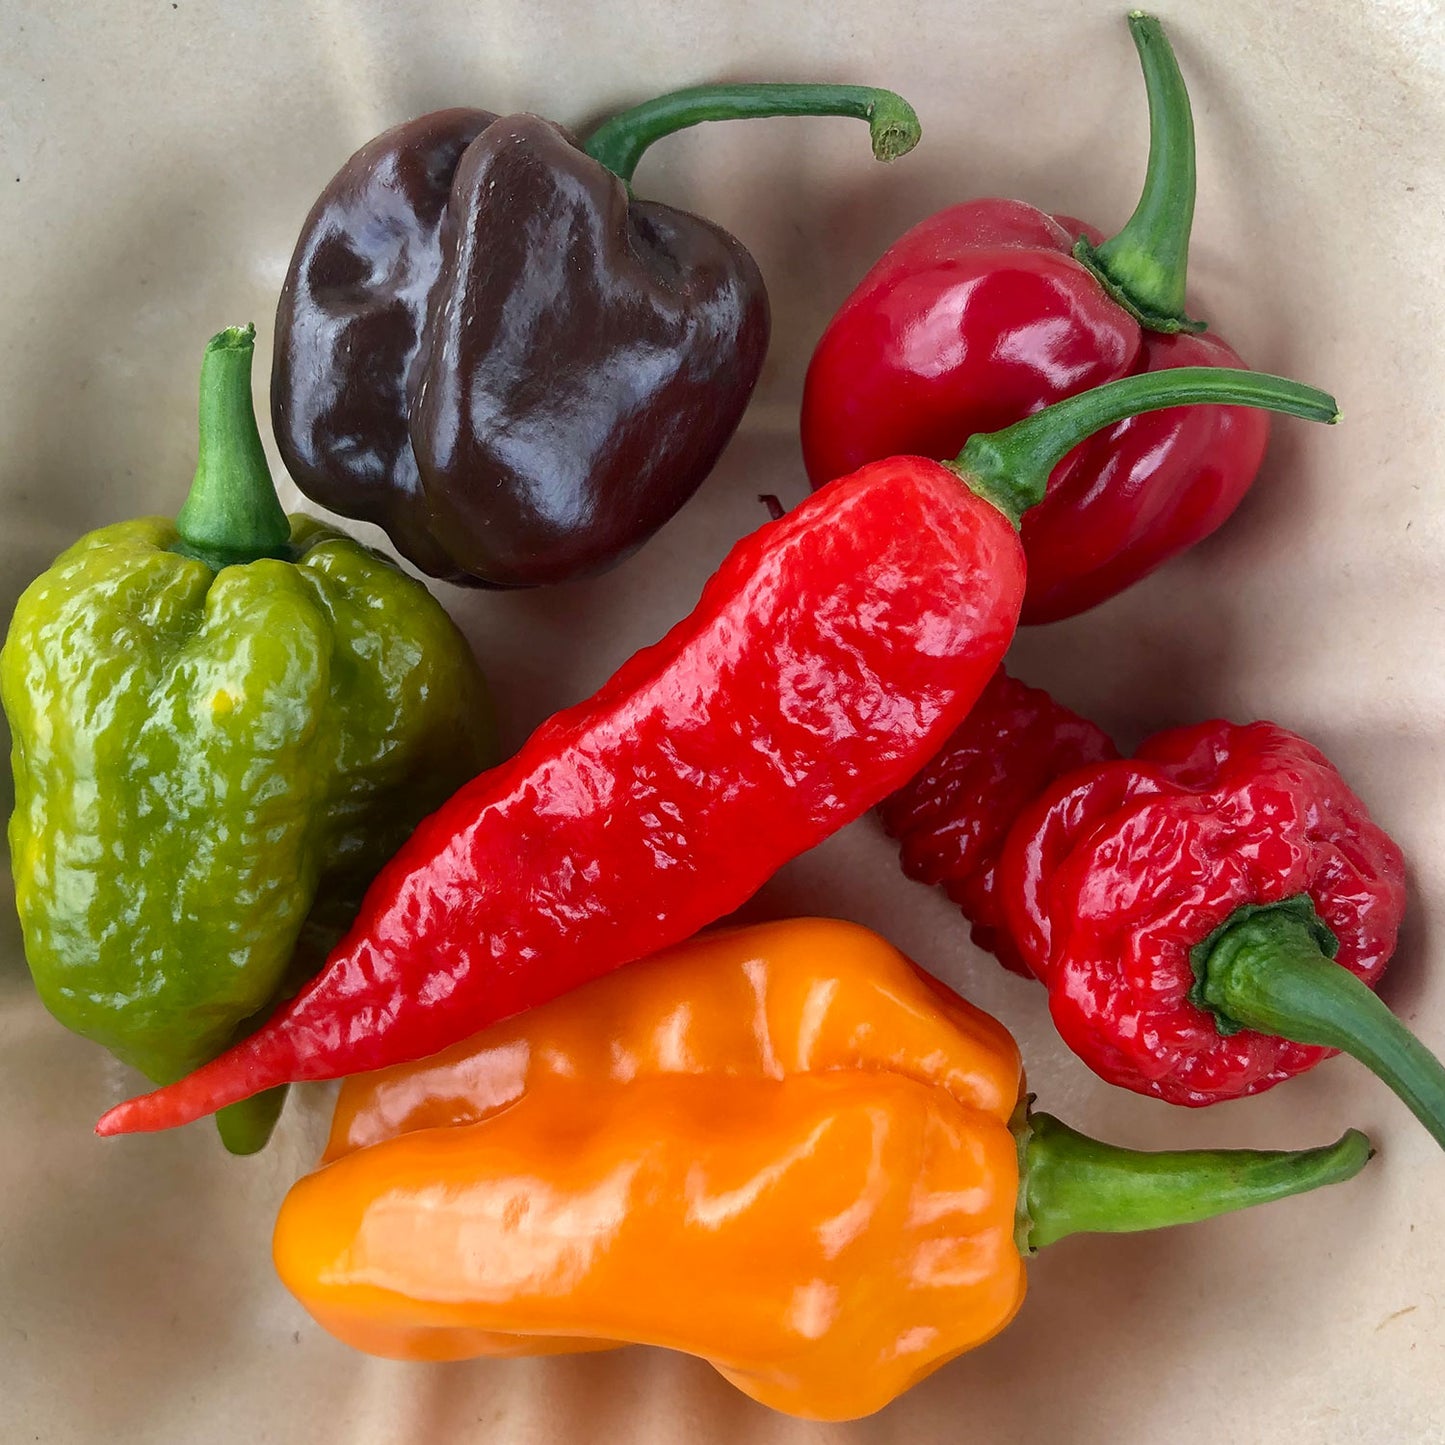 Pepper Joe's peppers pack - hot peppers - for sale - variety of hot peppers on gray background